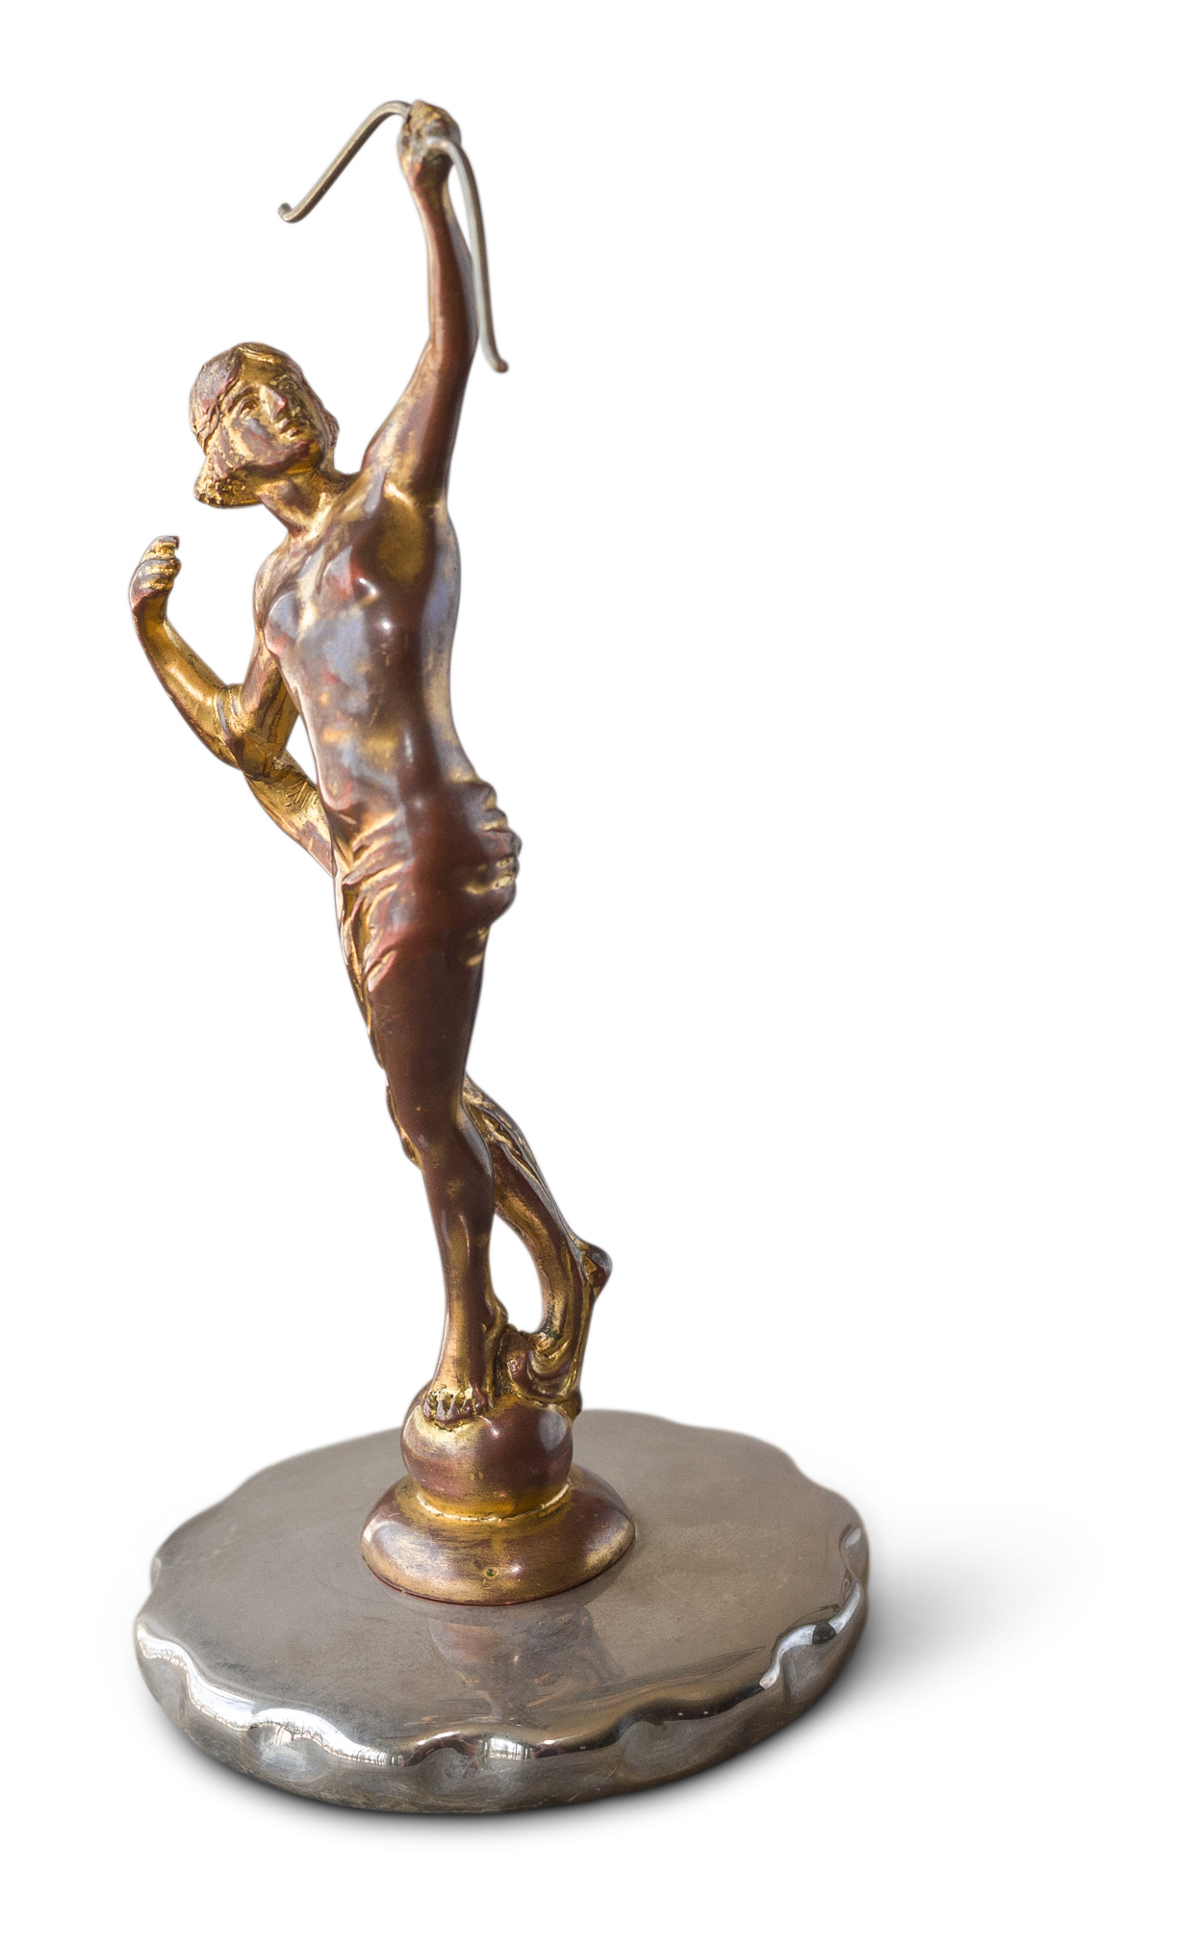 Diana Mascot ca. 1925-1928 offered at RM Sotheby's The Mitosinka Collection online auction 2020